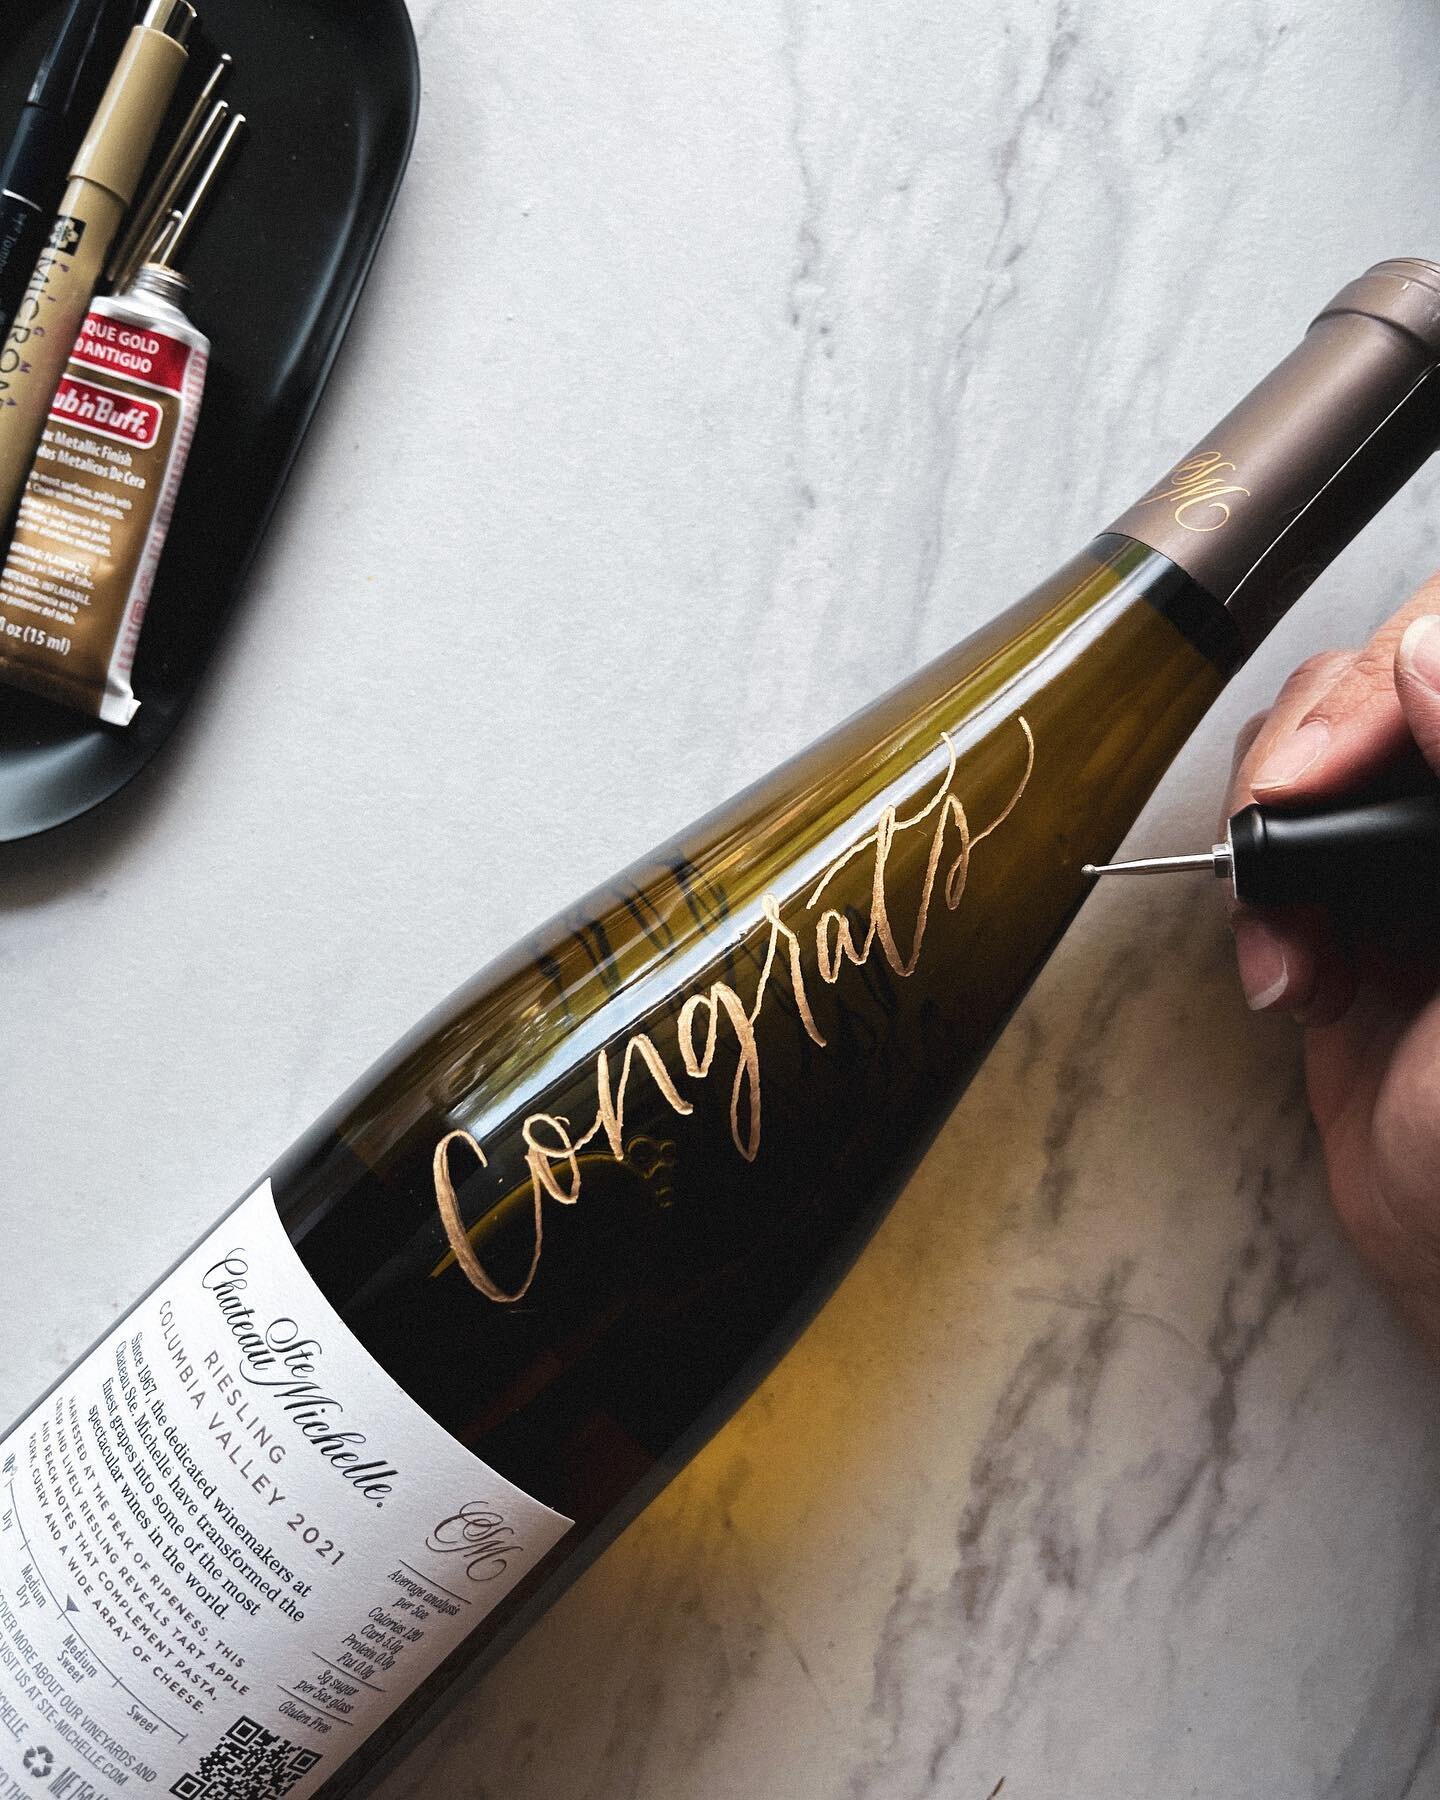 Wine bottle engraving ✨

I was really intimidated to start engraving. I ordered my supplies and a few weeks later was asked to do a live event, before I had even practiced 😳 I started practicing immediately and I asked my friends SO many questions a